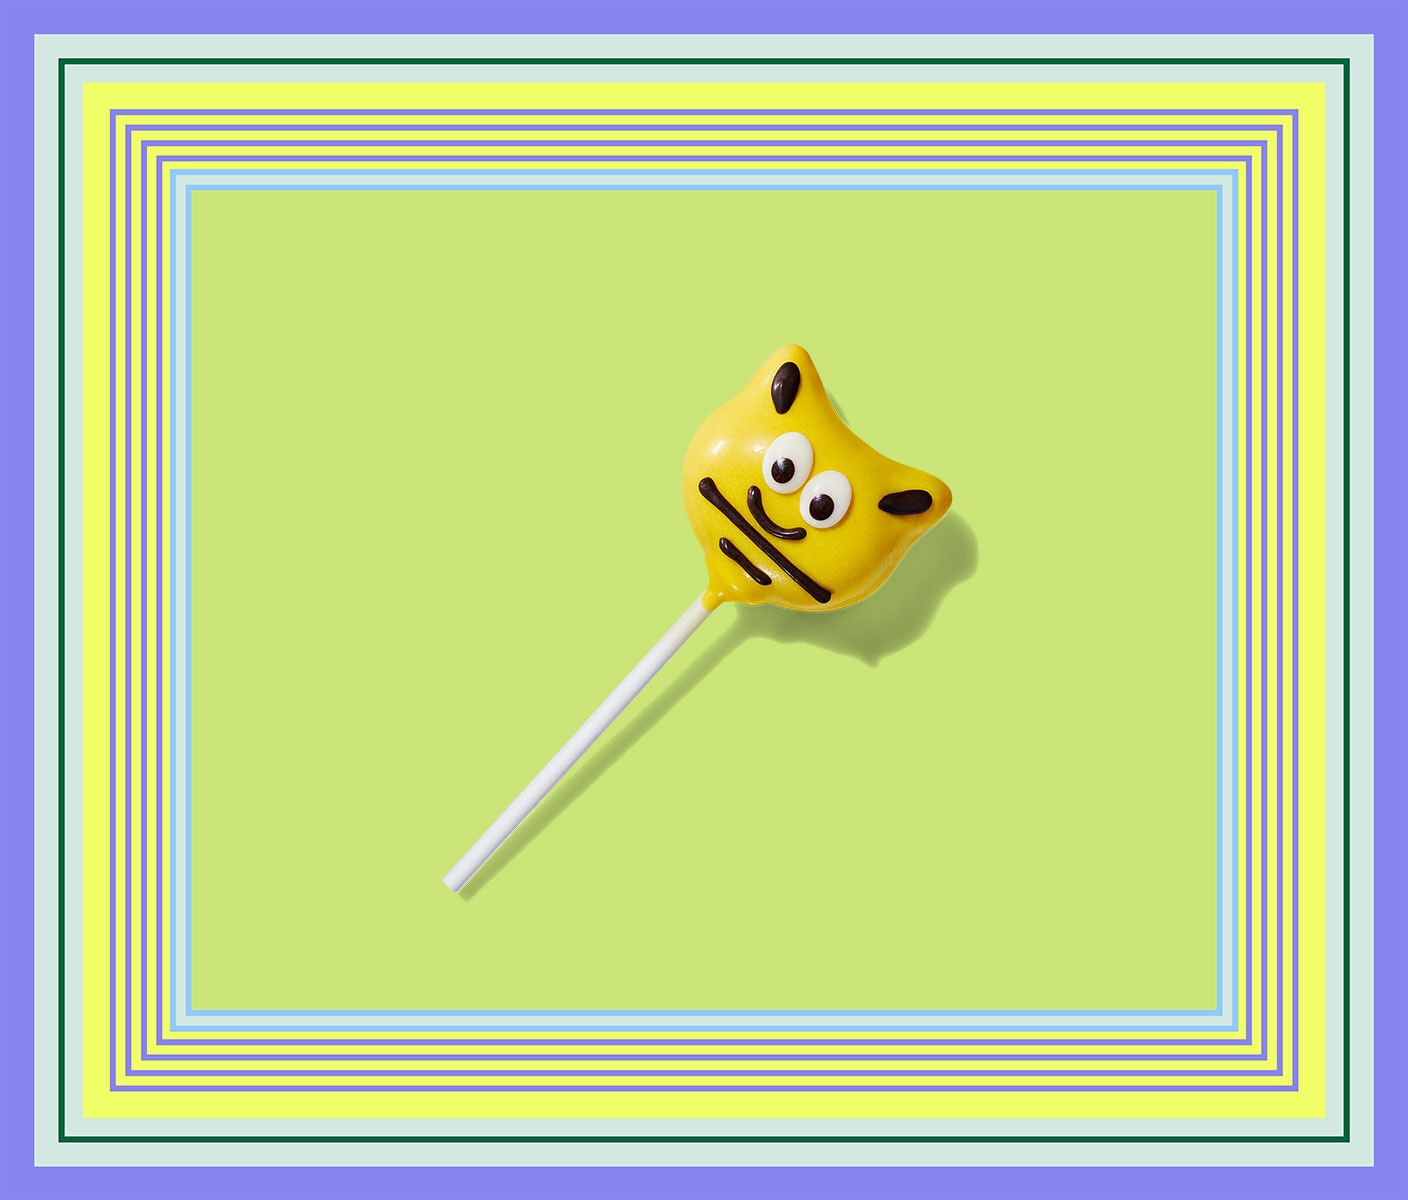 A bee-shaped cake pop covered in yellow frosting with a cartoonish-face.